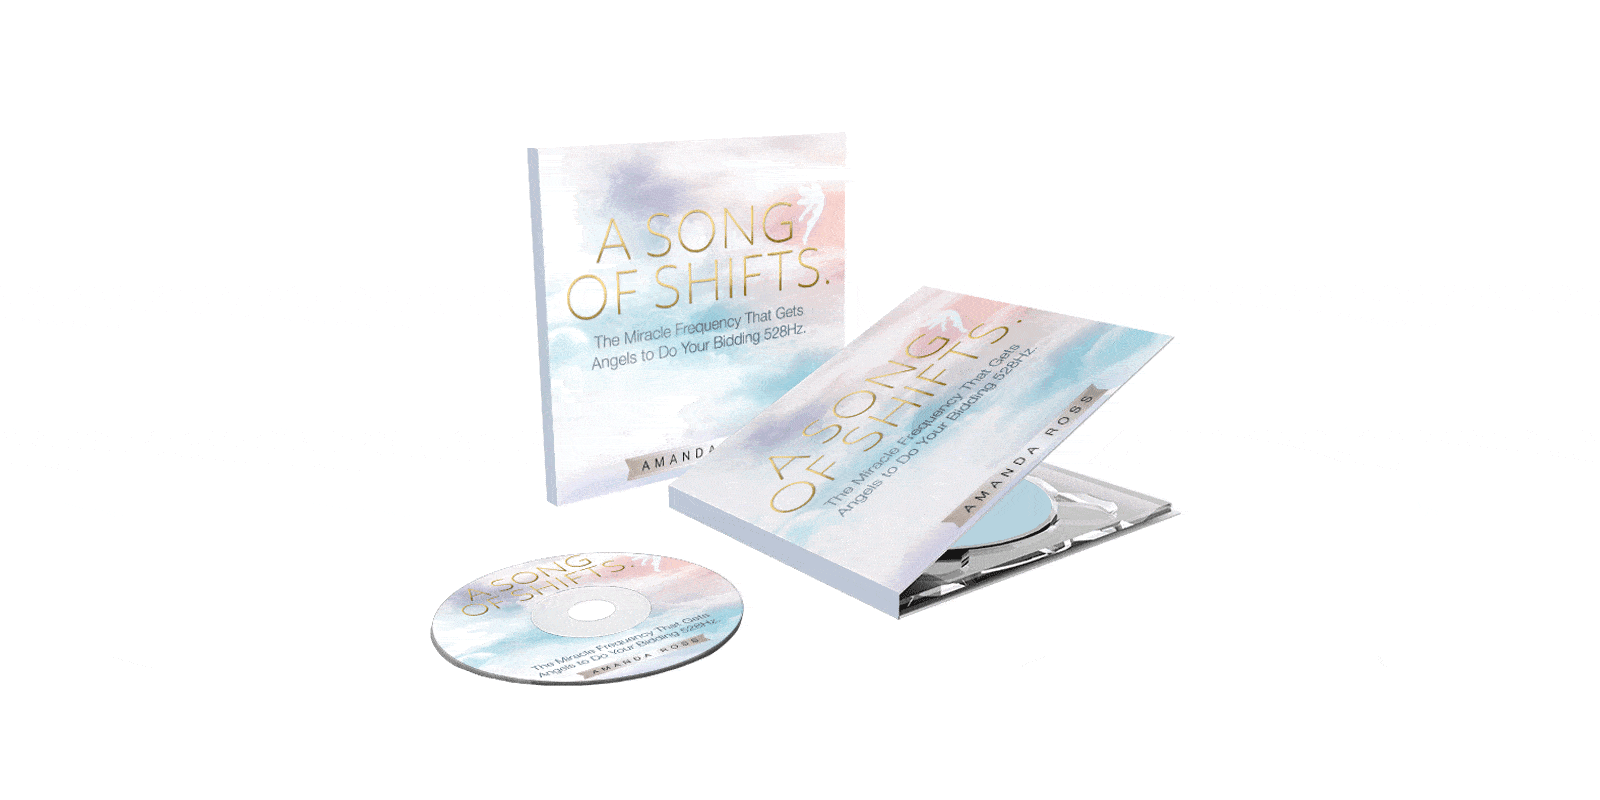 A-Song-of-Shifts-CD